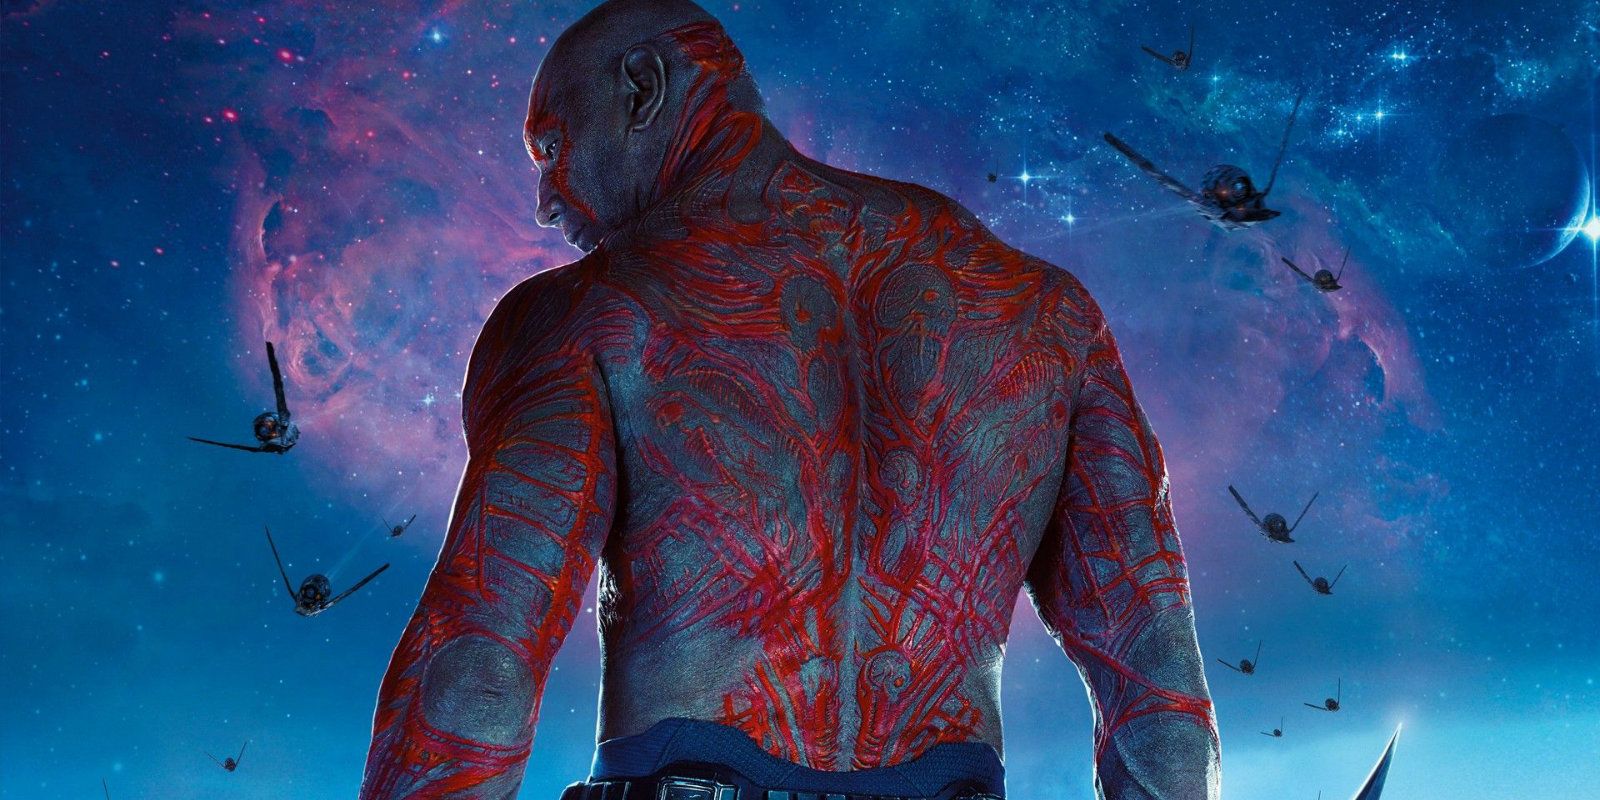 Drax the Destroyer from Guardians of the Galaxy